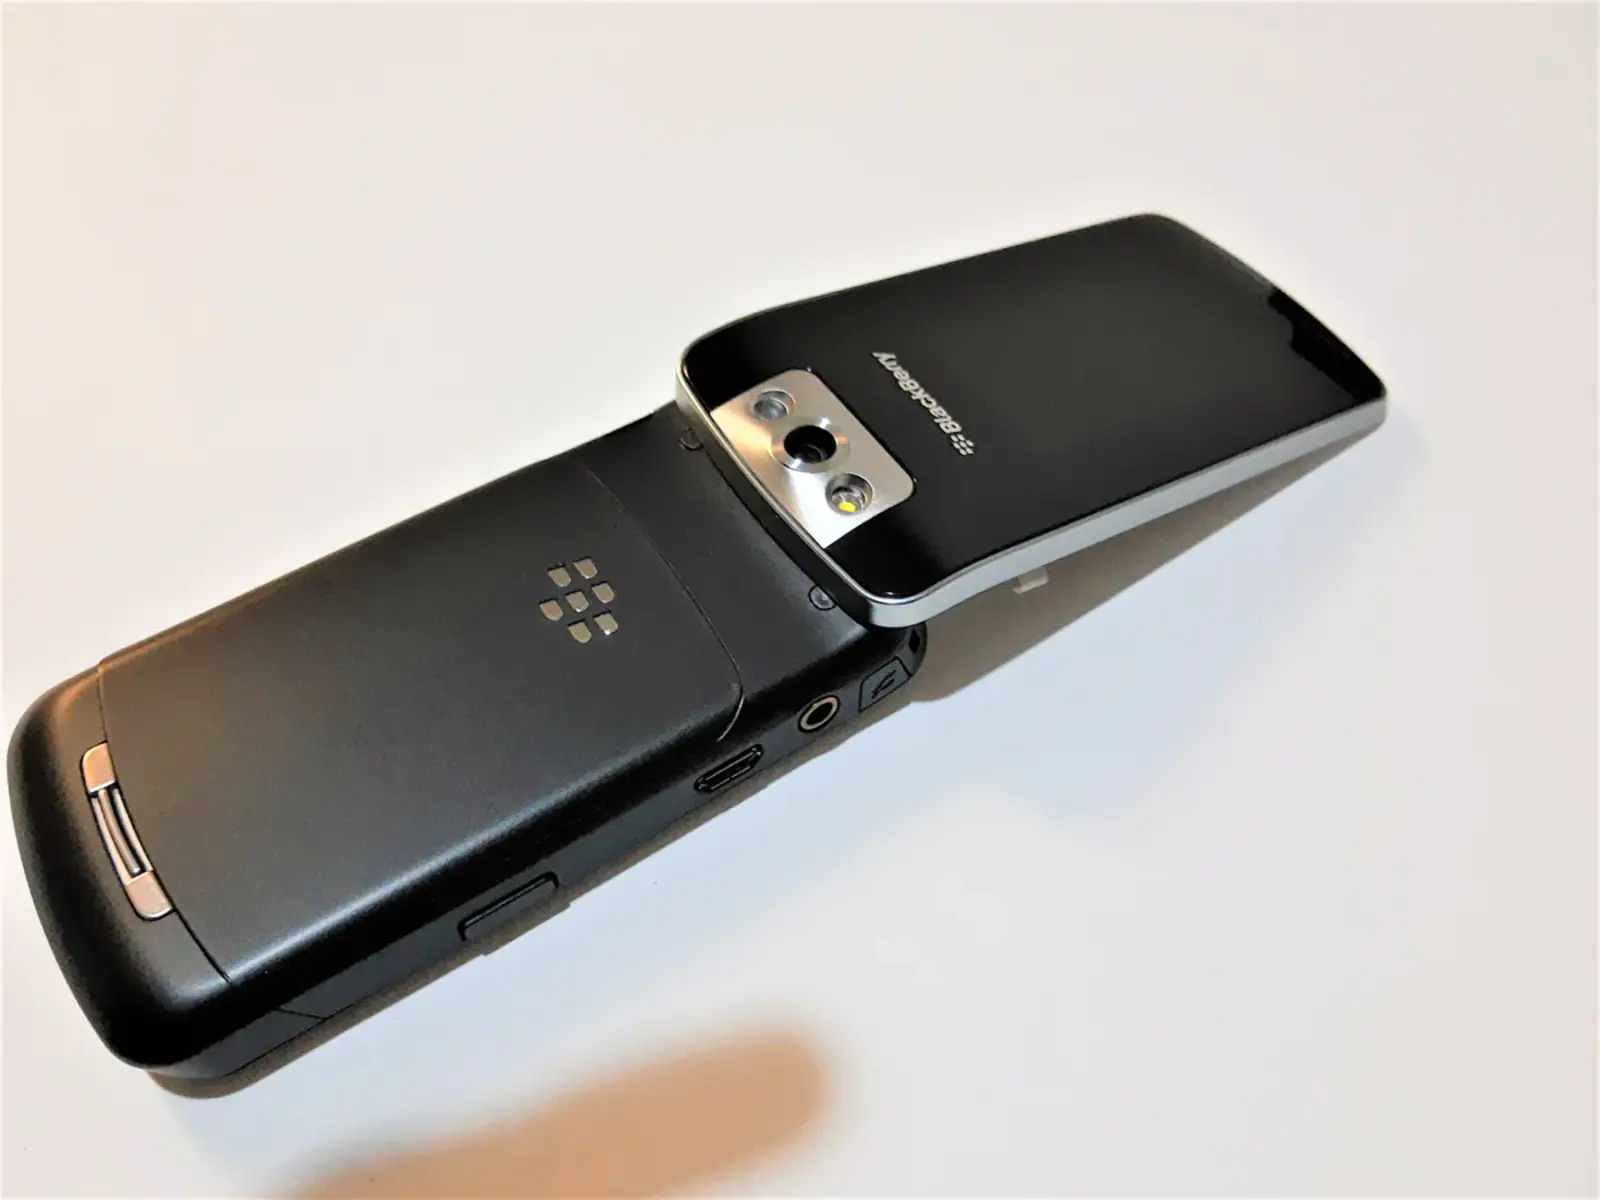 Locating The SIM Card Slot On Blackberry Pearl